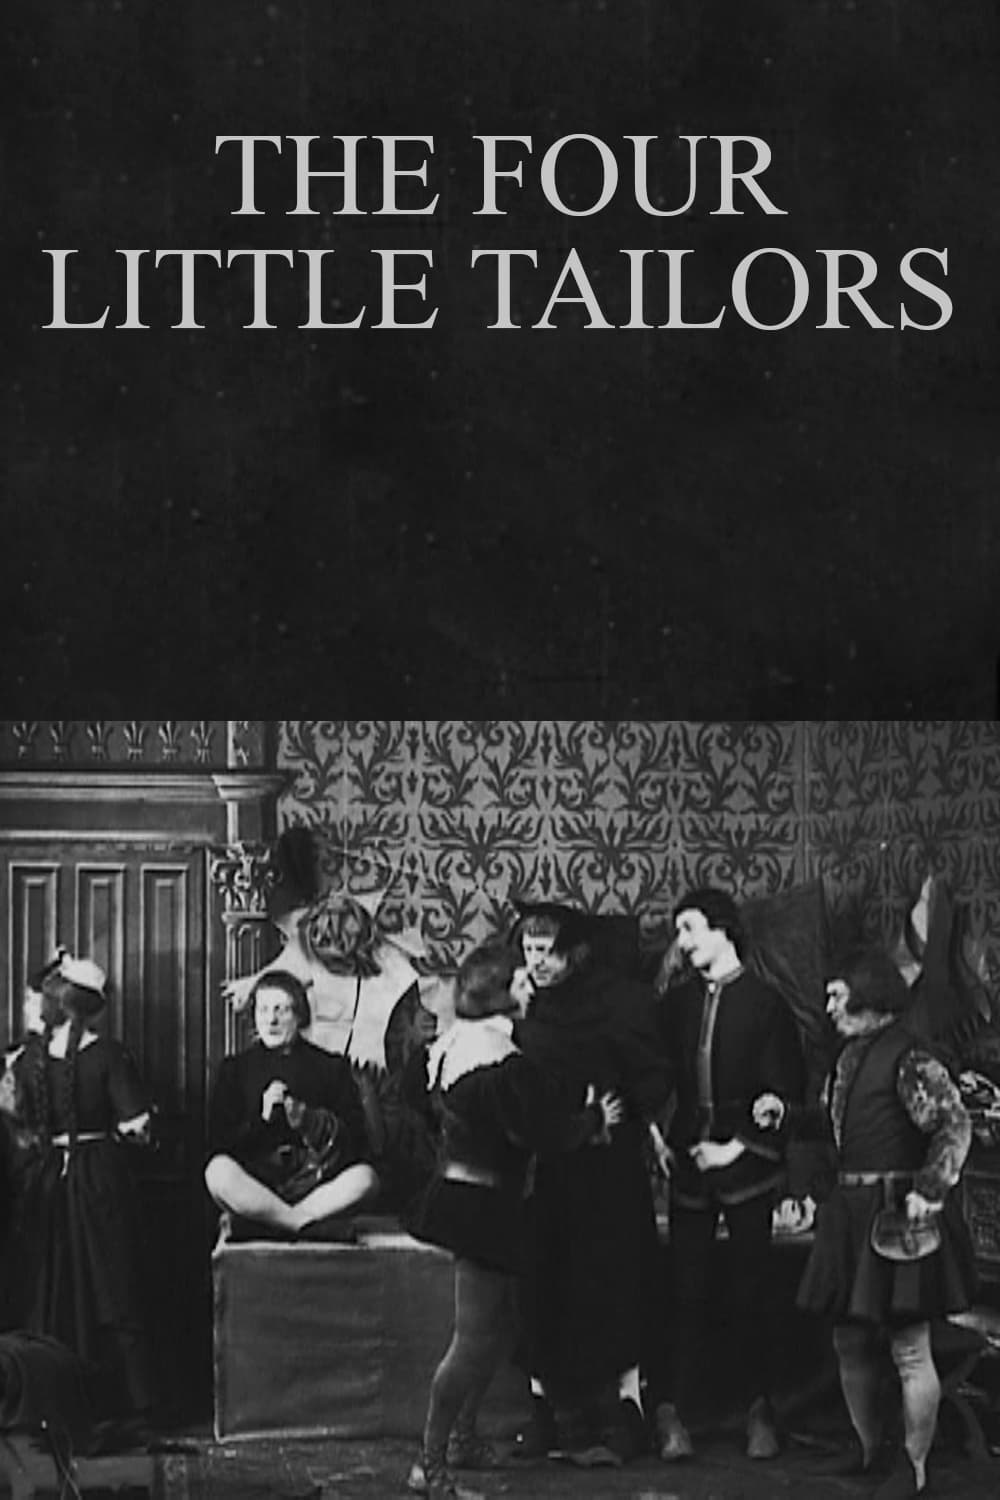 The Four Little Tailors